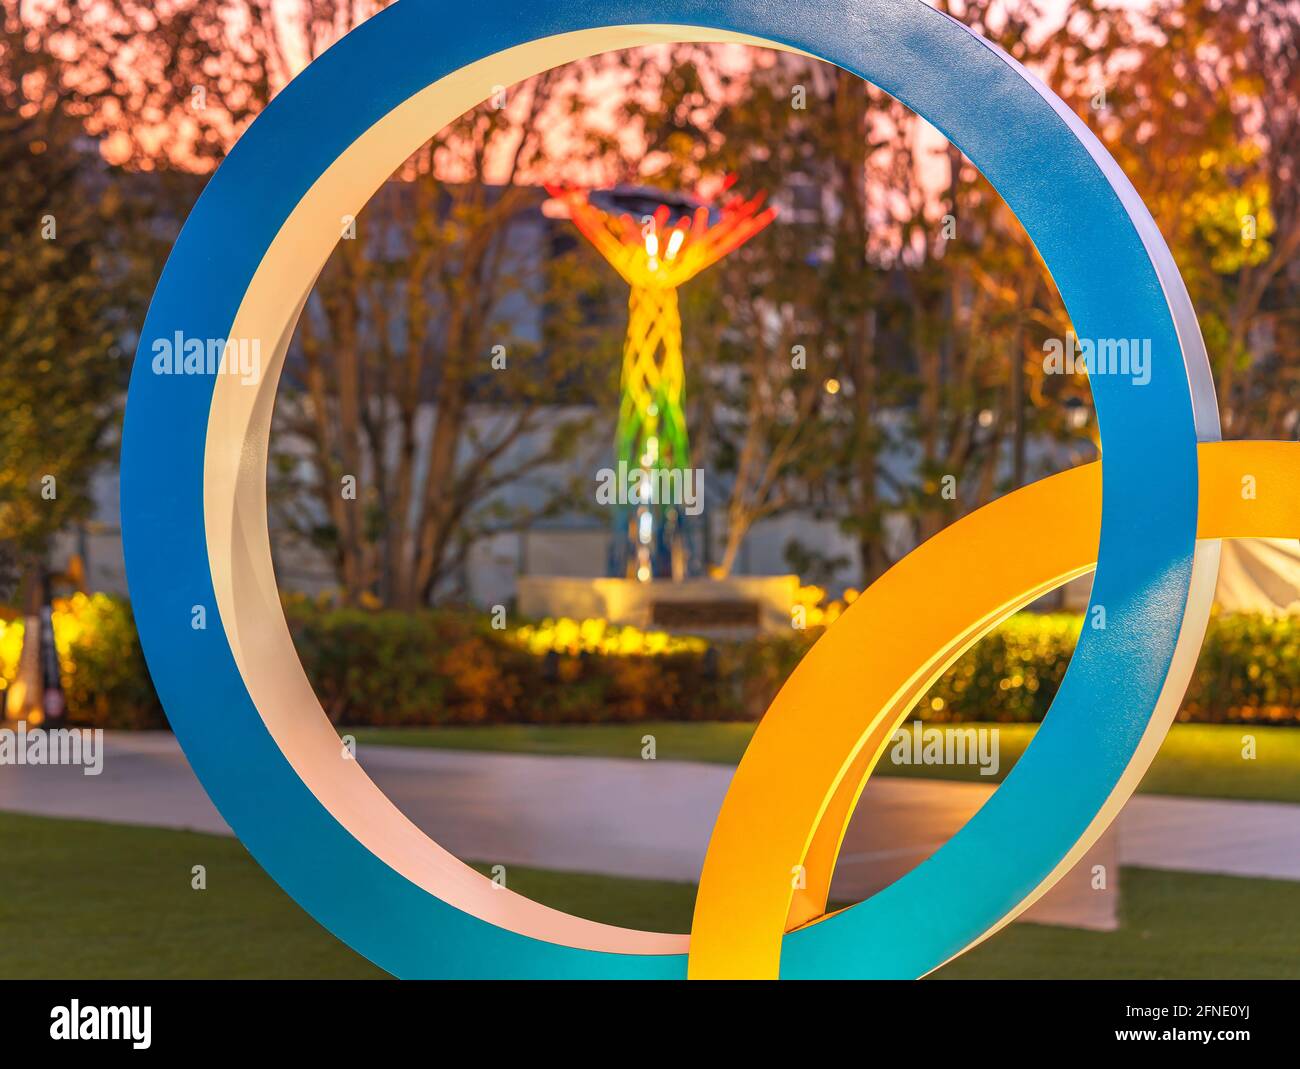 tokyo, japan - may 10 2021: Close up on one of ring of the Olympic Rings monument lighted up at dusk with the illuminated Olympic Cauldron of Nagano O Stock Photo